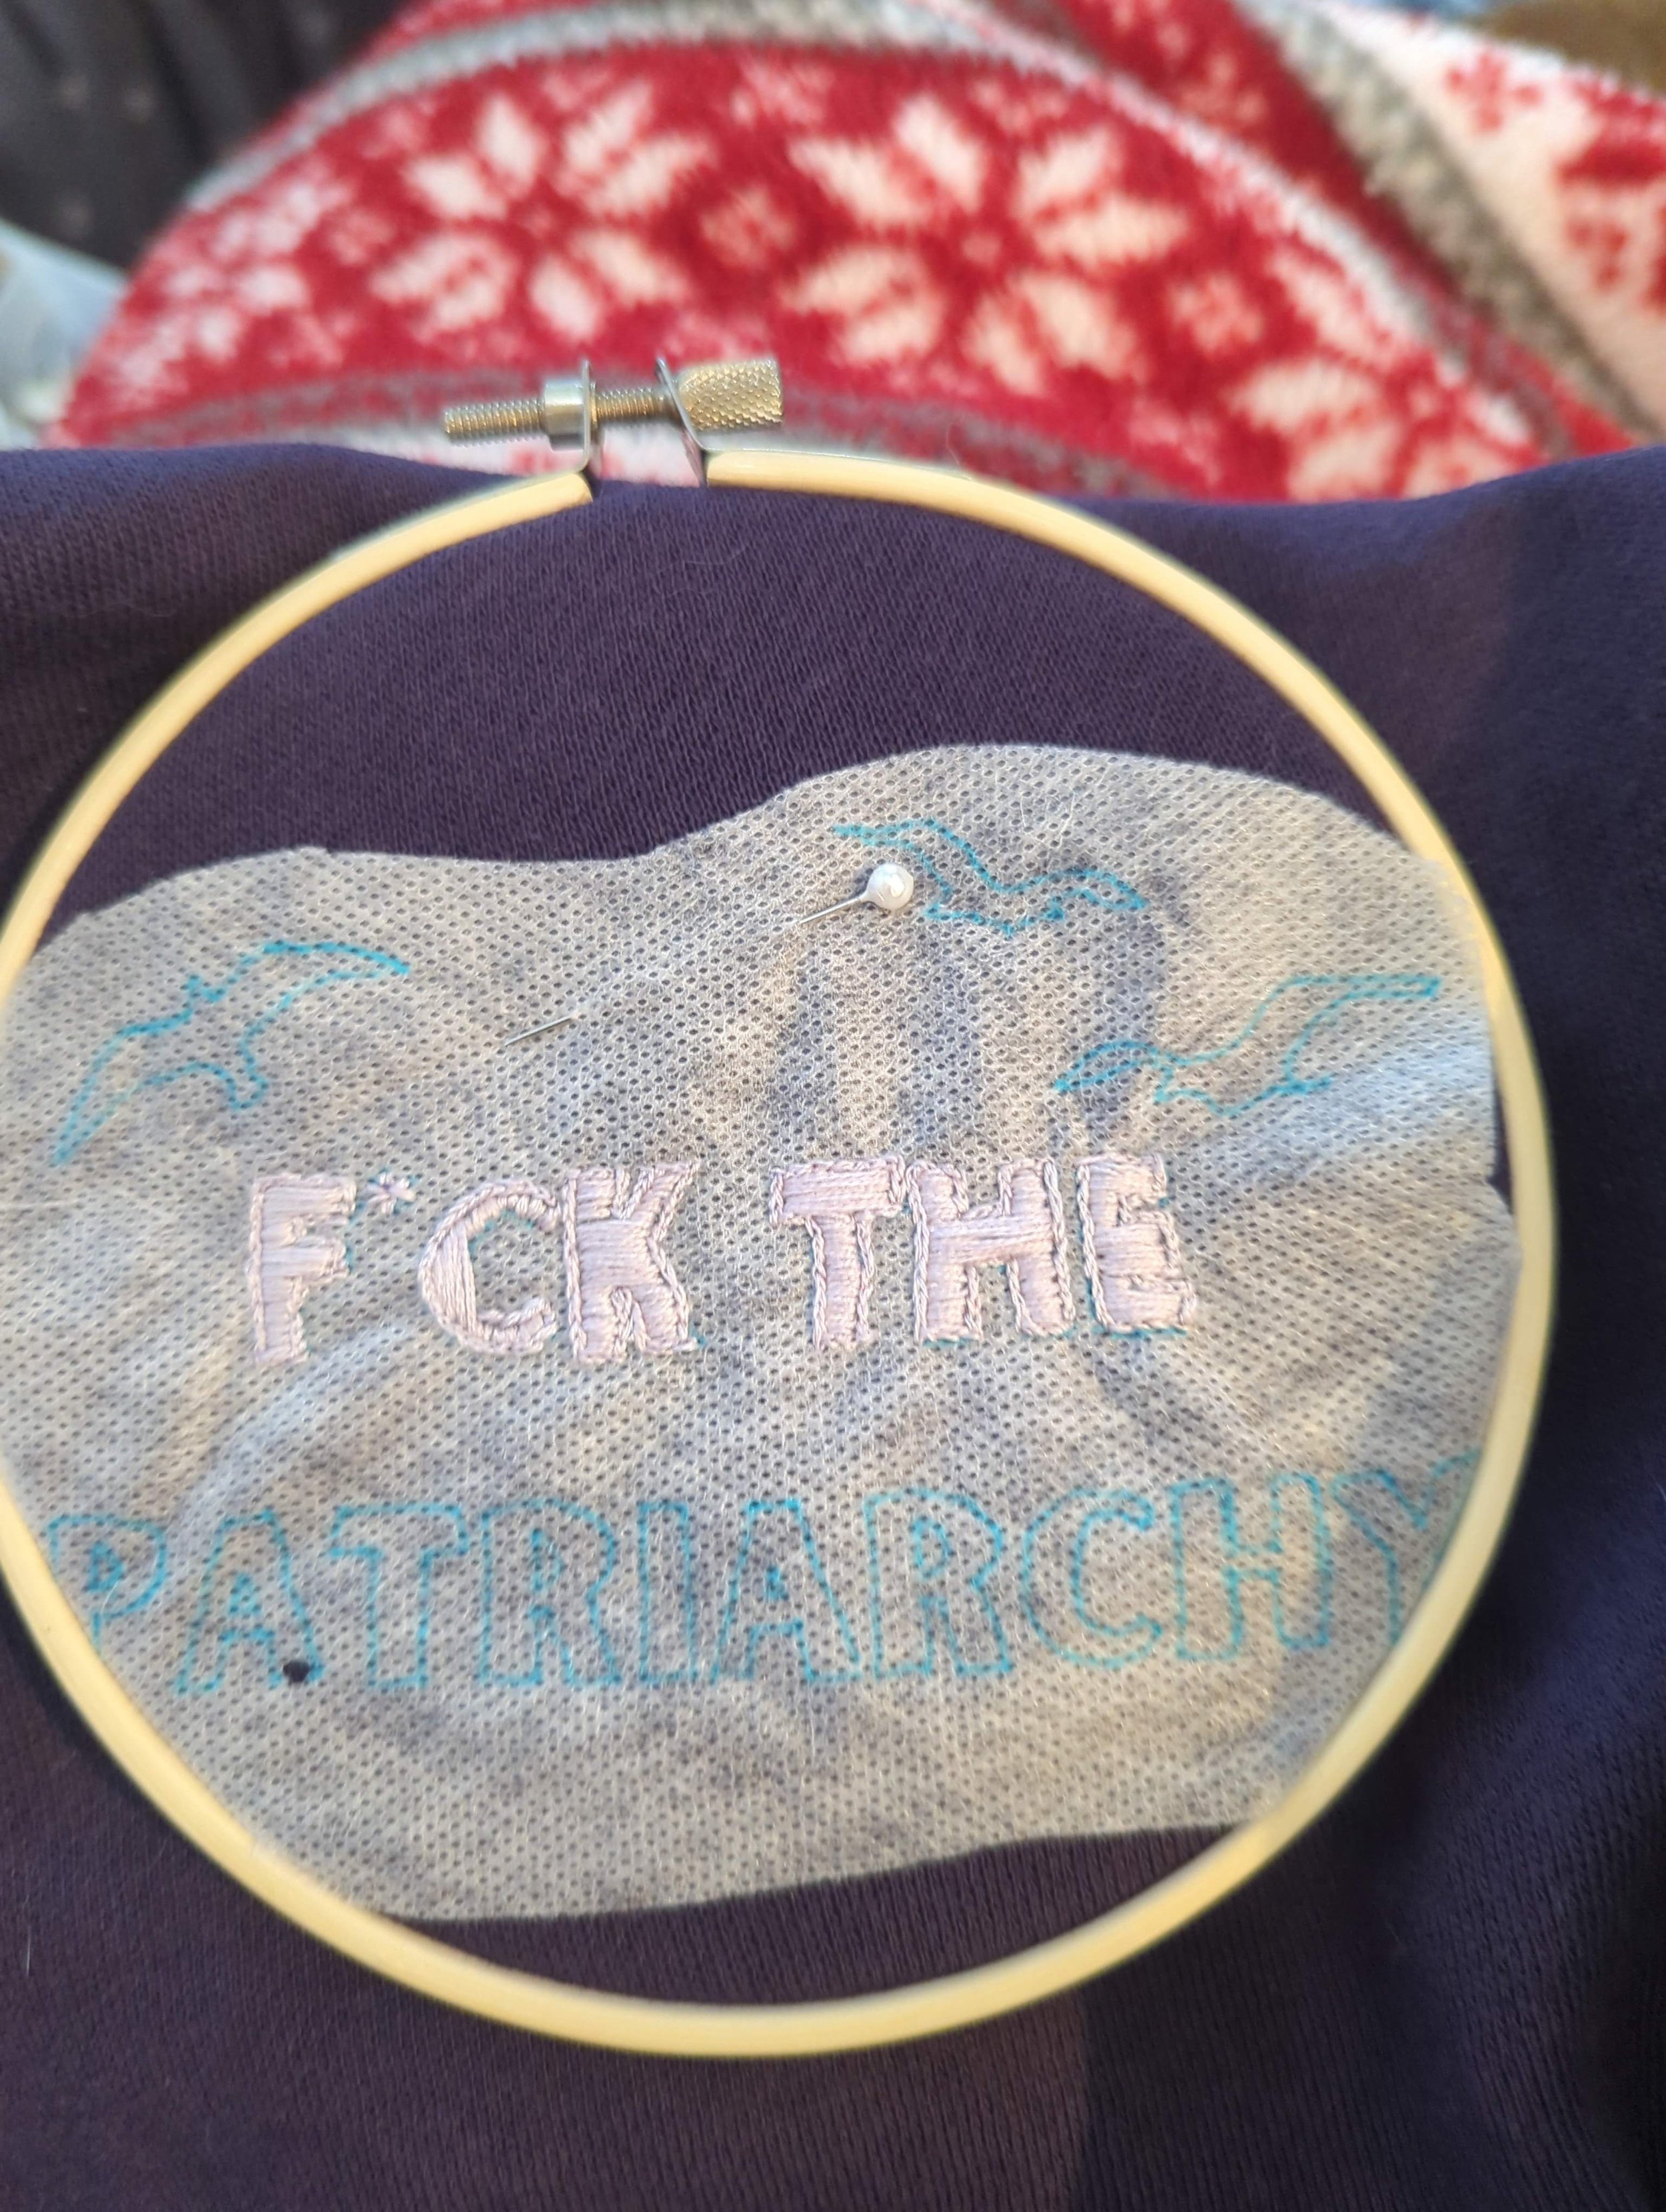  I can finally show photos of some of the embroidery I’ve been working on because everyone has now officially received their gifts! This was the before photo! 